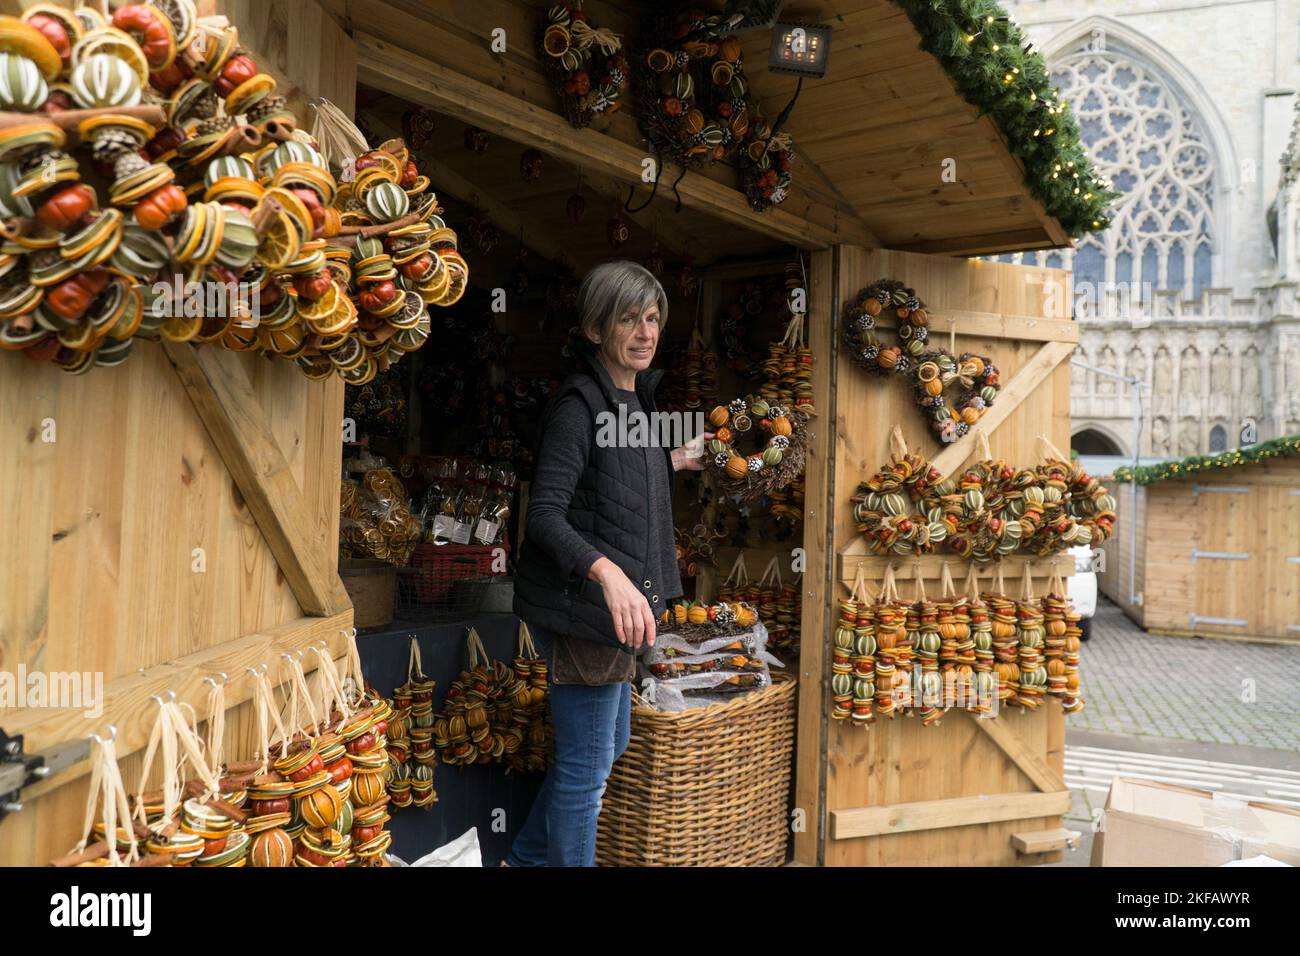 Exeter, UK, 17 November 2022: Vendors are setting up their stalls for the opening of the Exeter Christmas market tomorrow. Clayre, who works for the Devon-based firm Pollyfields, decorates their chalet-style stall with scented dried fruit wreaths. Anna Watson/Alamy Live News Stock Photo